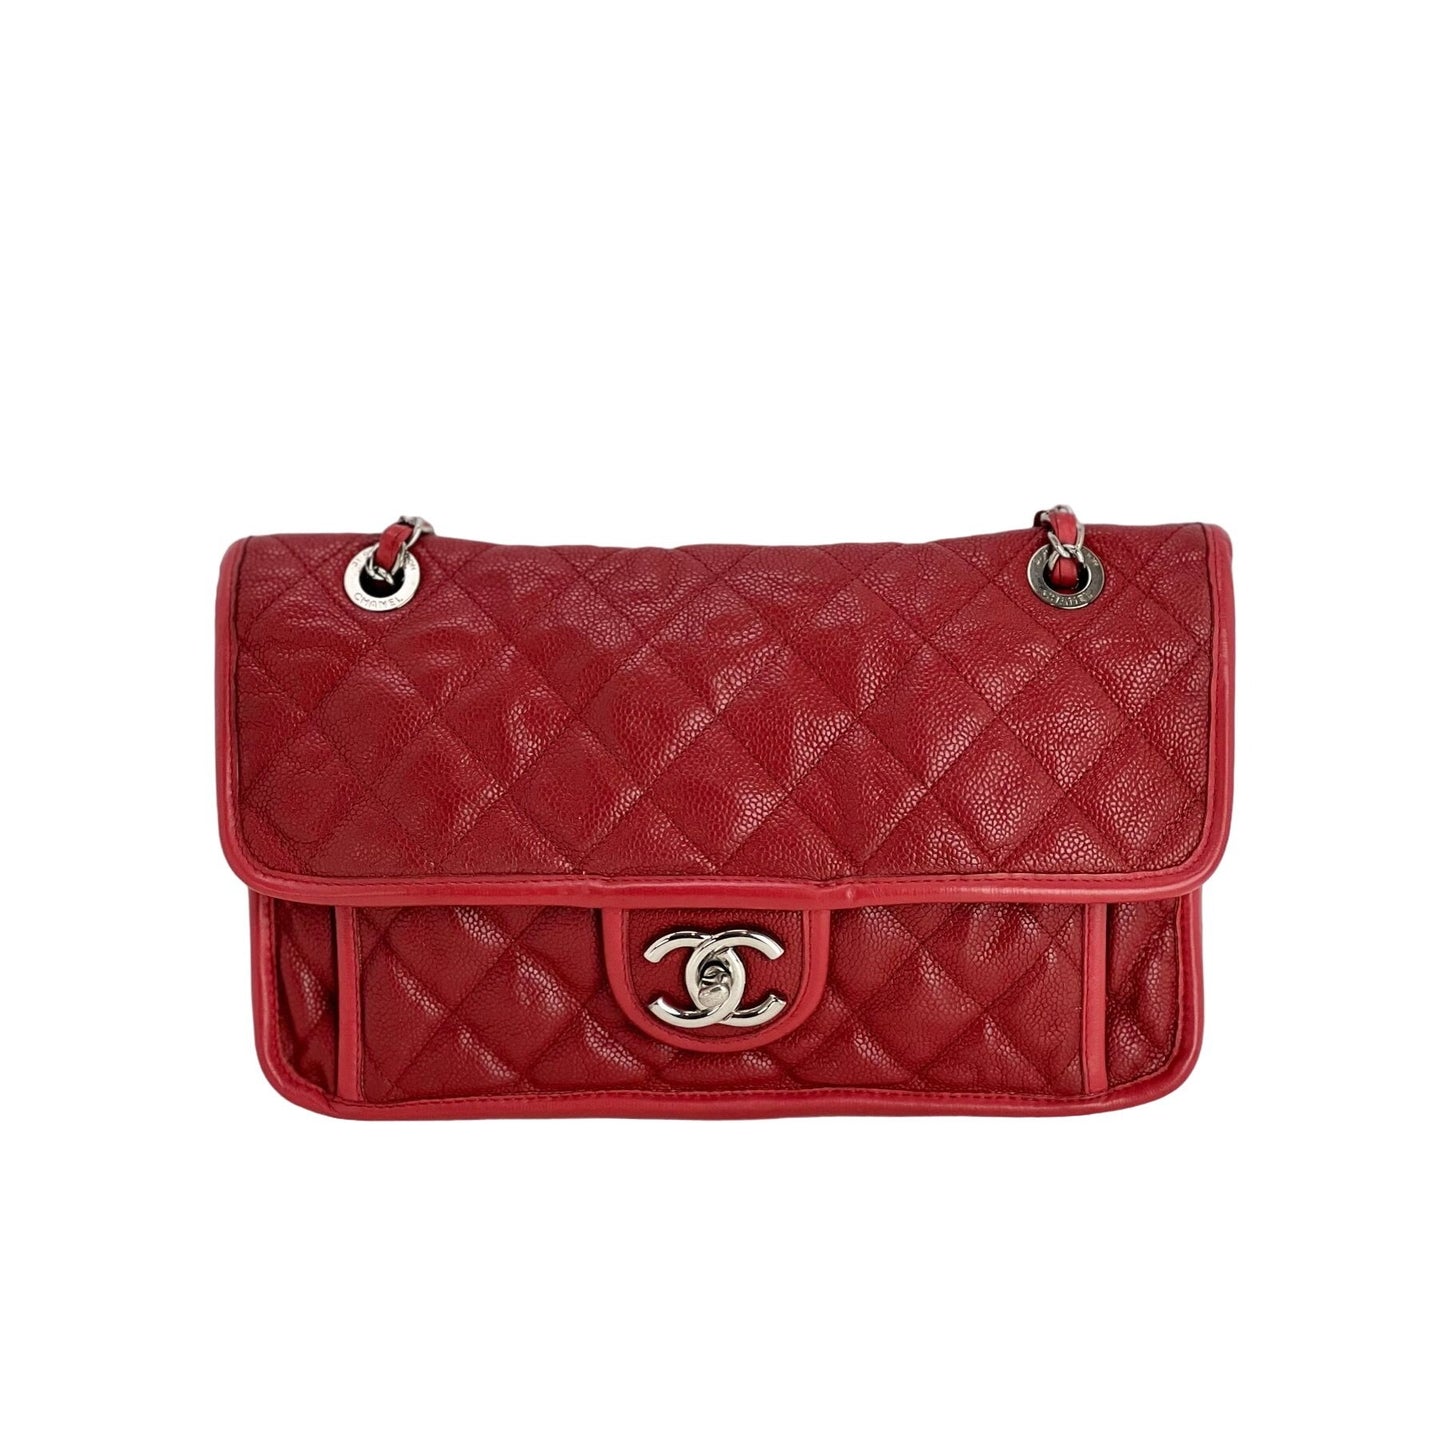 CHANEL, Bags, Chanel Caviar Coco Top Handle Bag Newlimited Edition 23p  Latest Collection